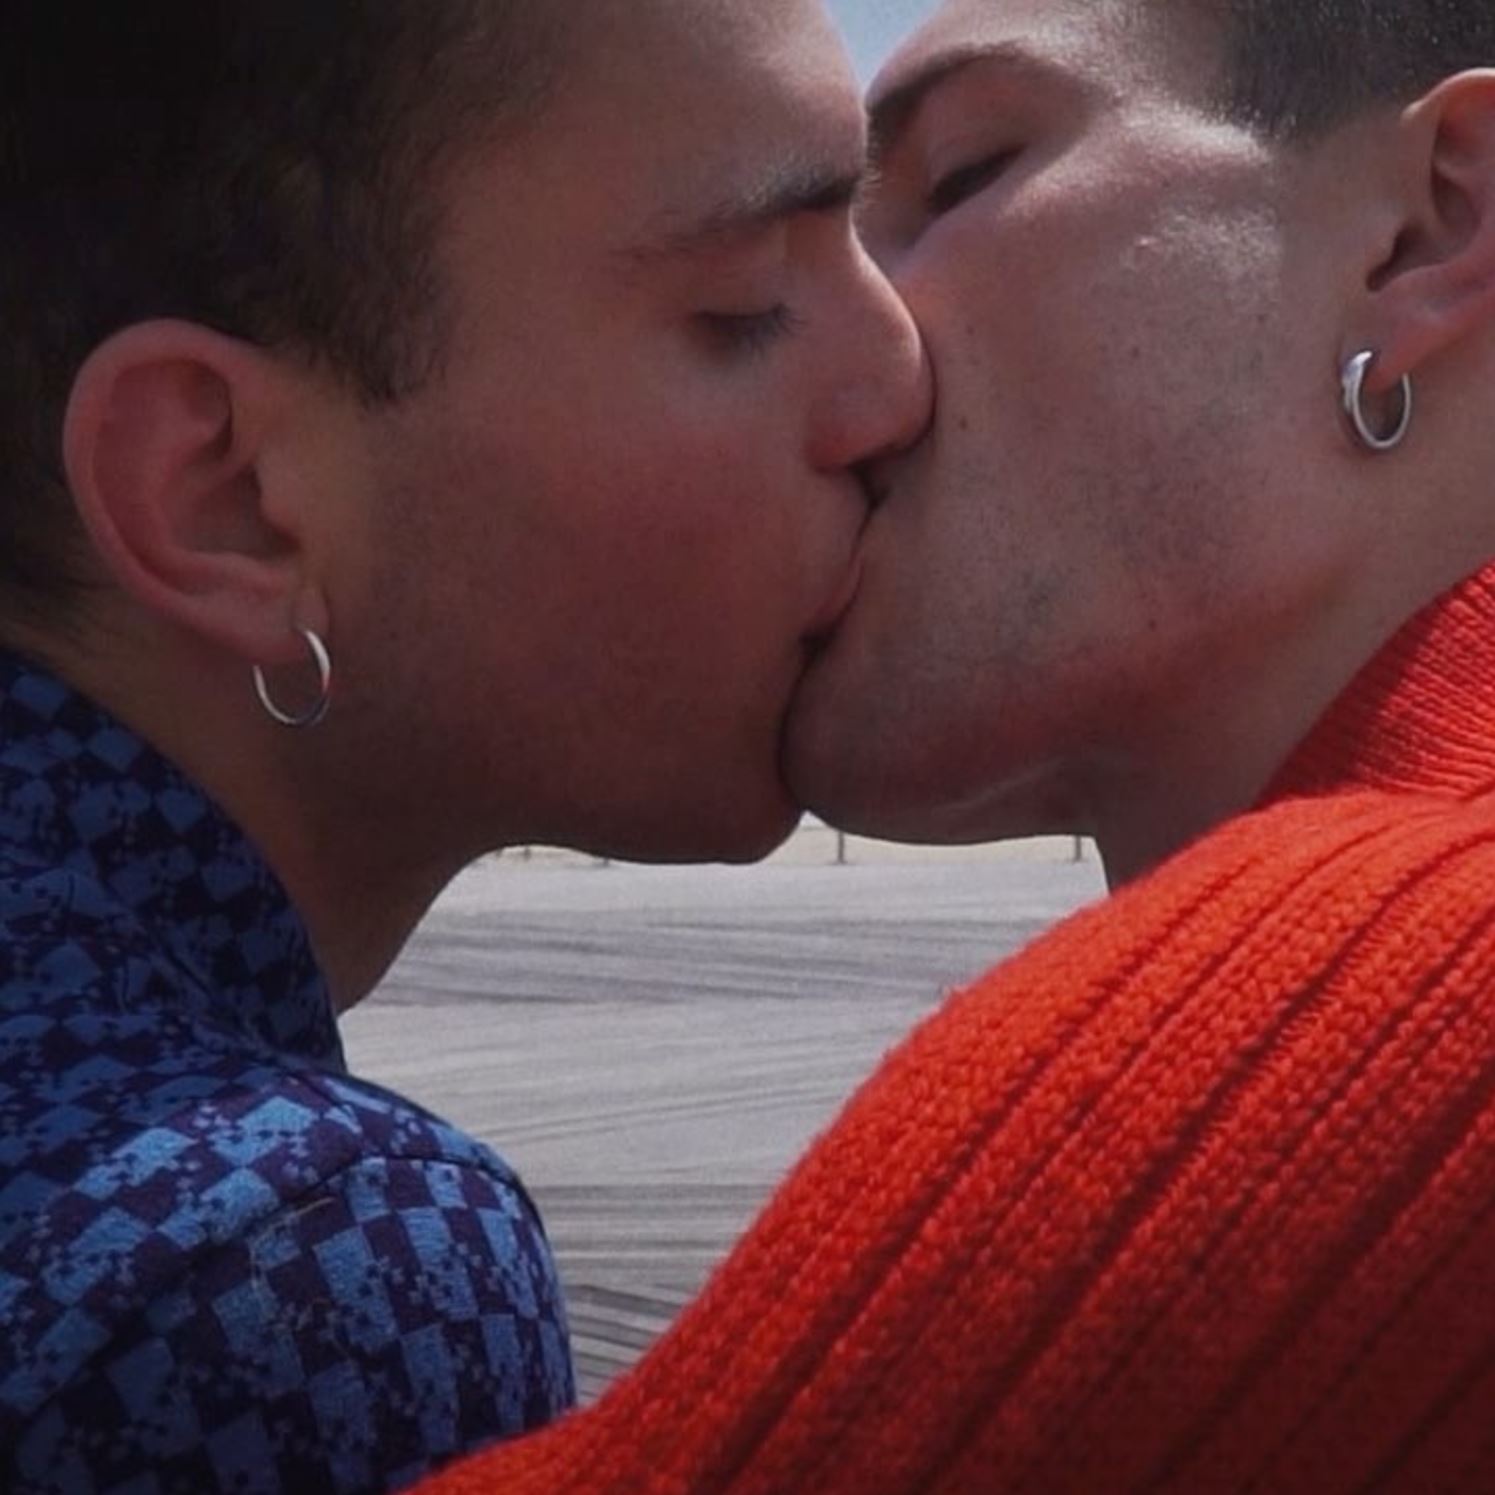 Italian Vogue covers to feature LGBTQ+ couples kissing, making a statement in a country that does not accept same-sex marriage